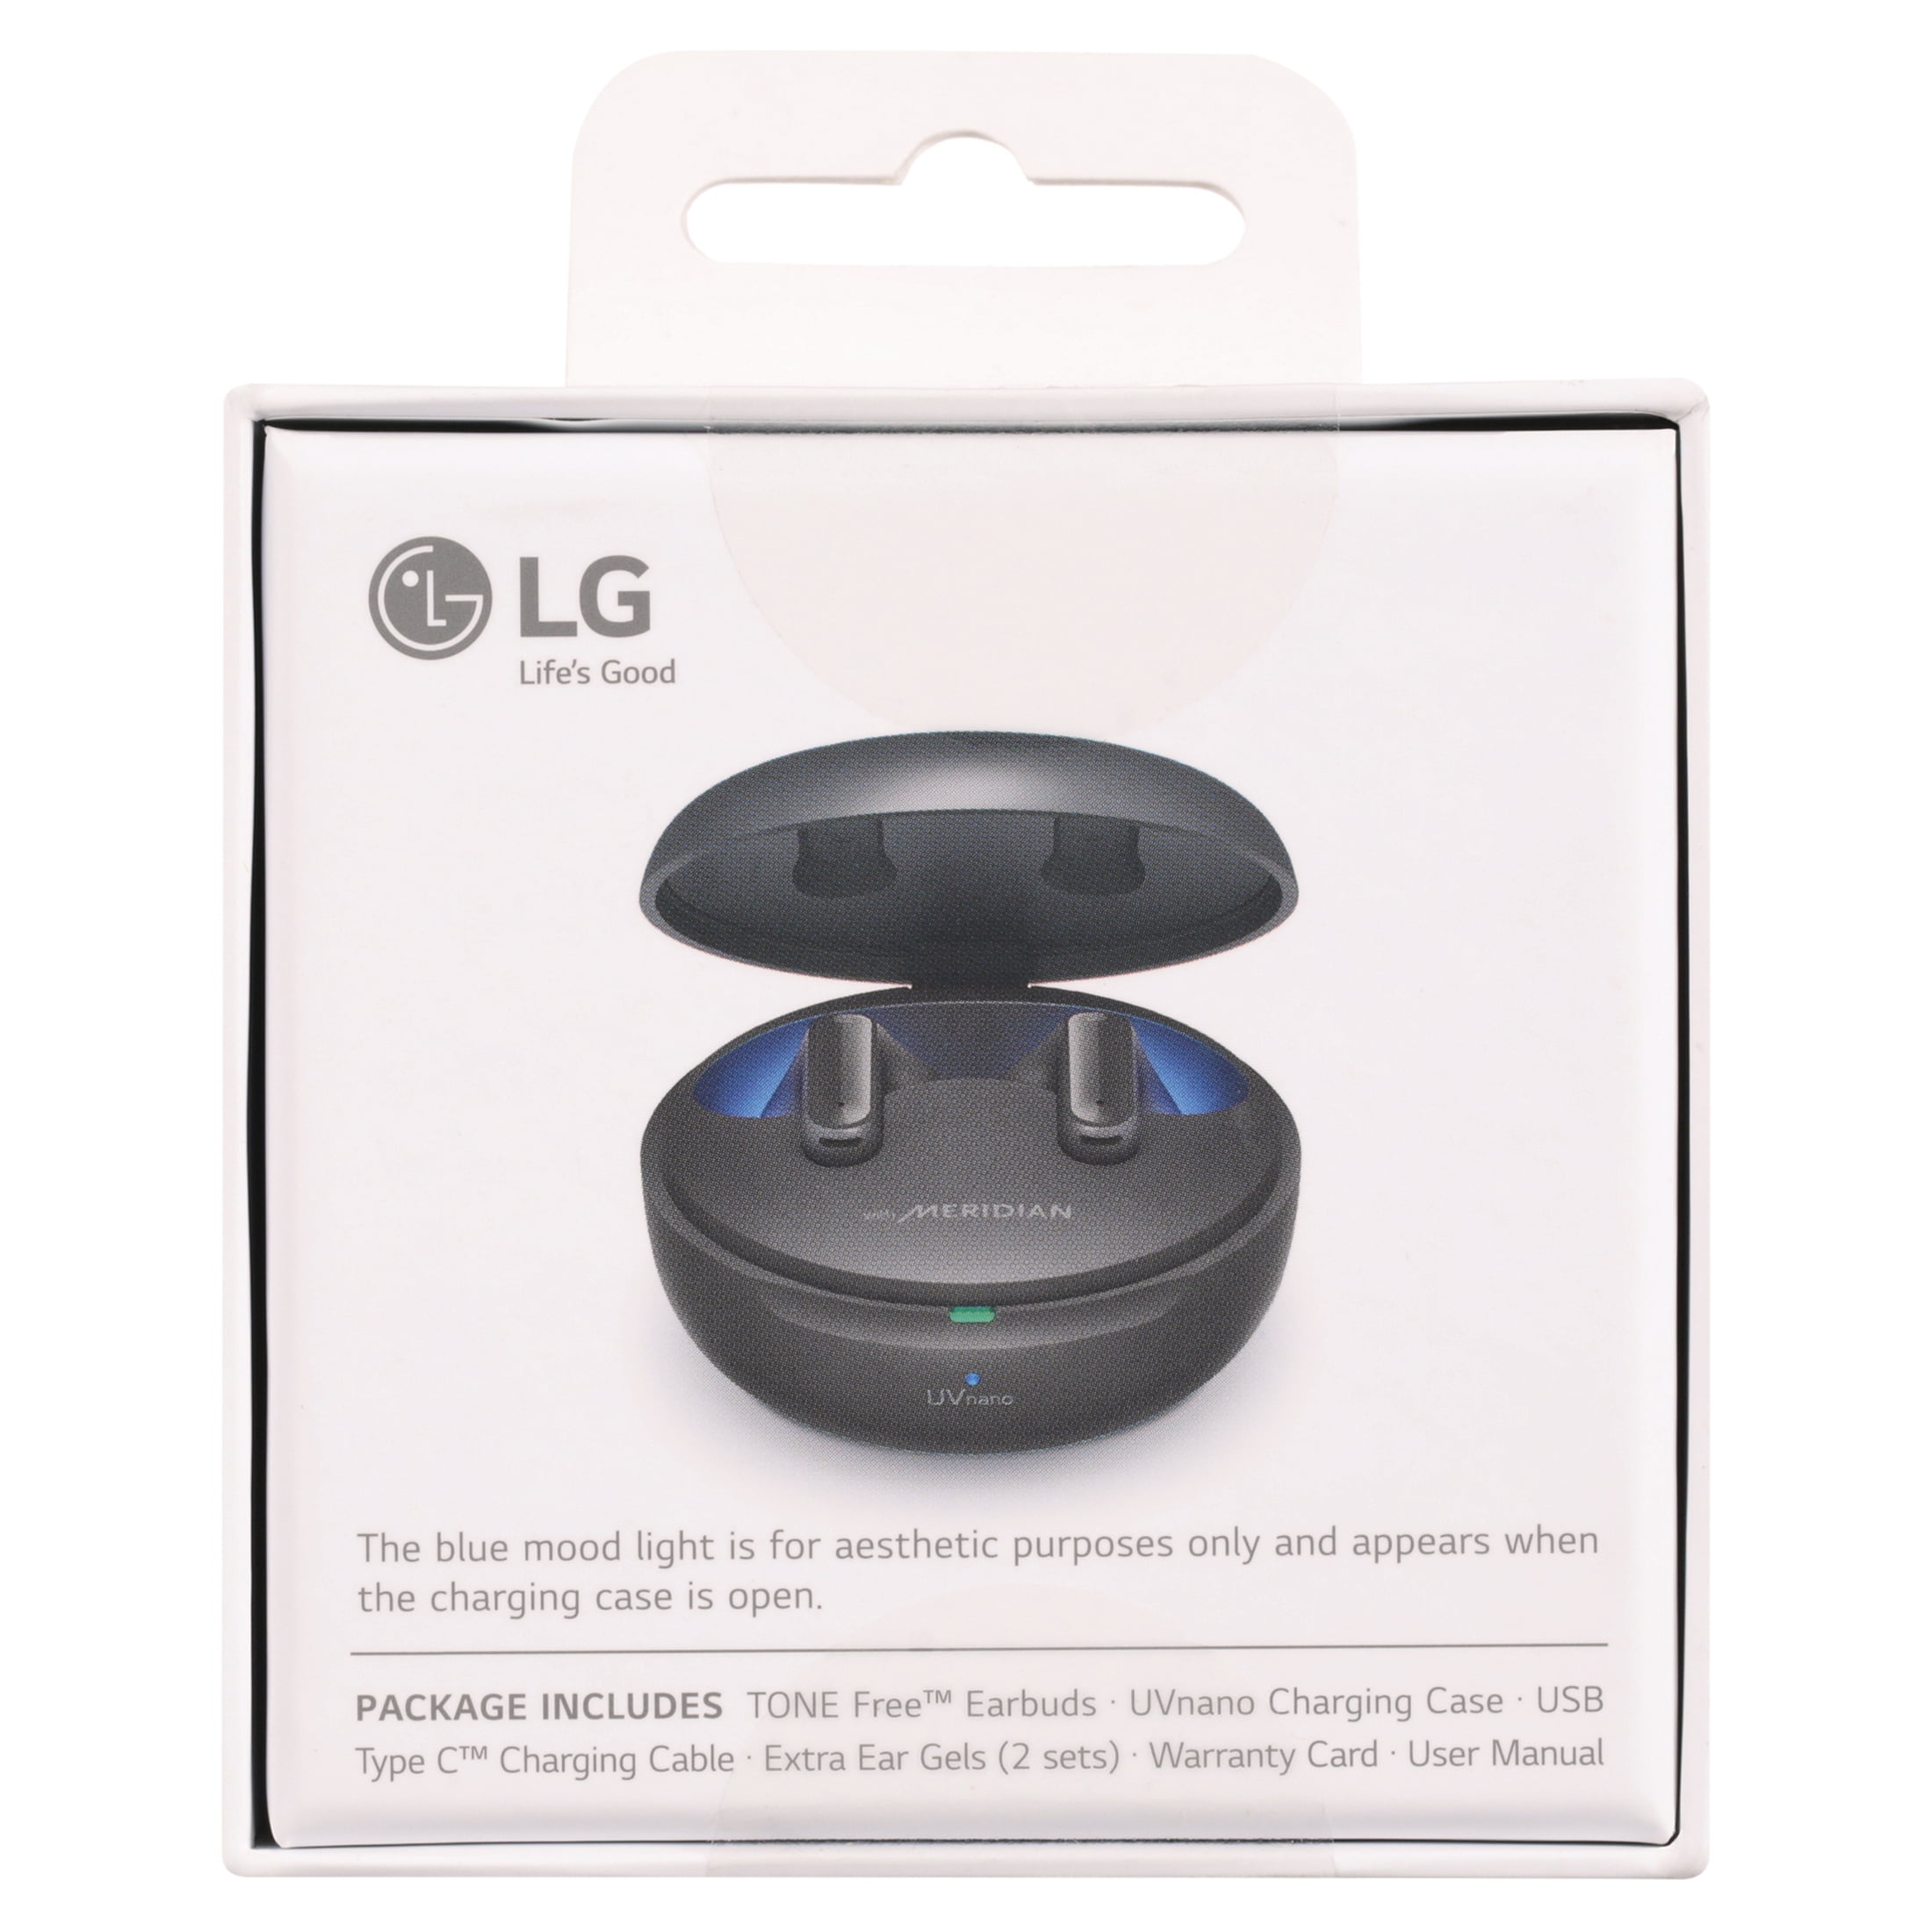 Free LG on TONE Bacteria Immersive 3 3D Enhanced Bluetooth Active Sound, 99.9% Cancelling of Mesh, Meridian Kills Black Mics, Wireless Noise FP8 Earbuds with True UVnano Speaker Sound,